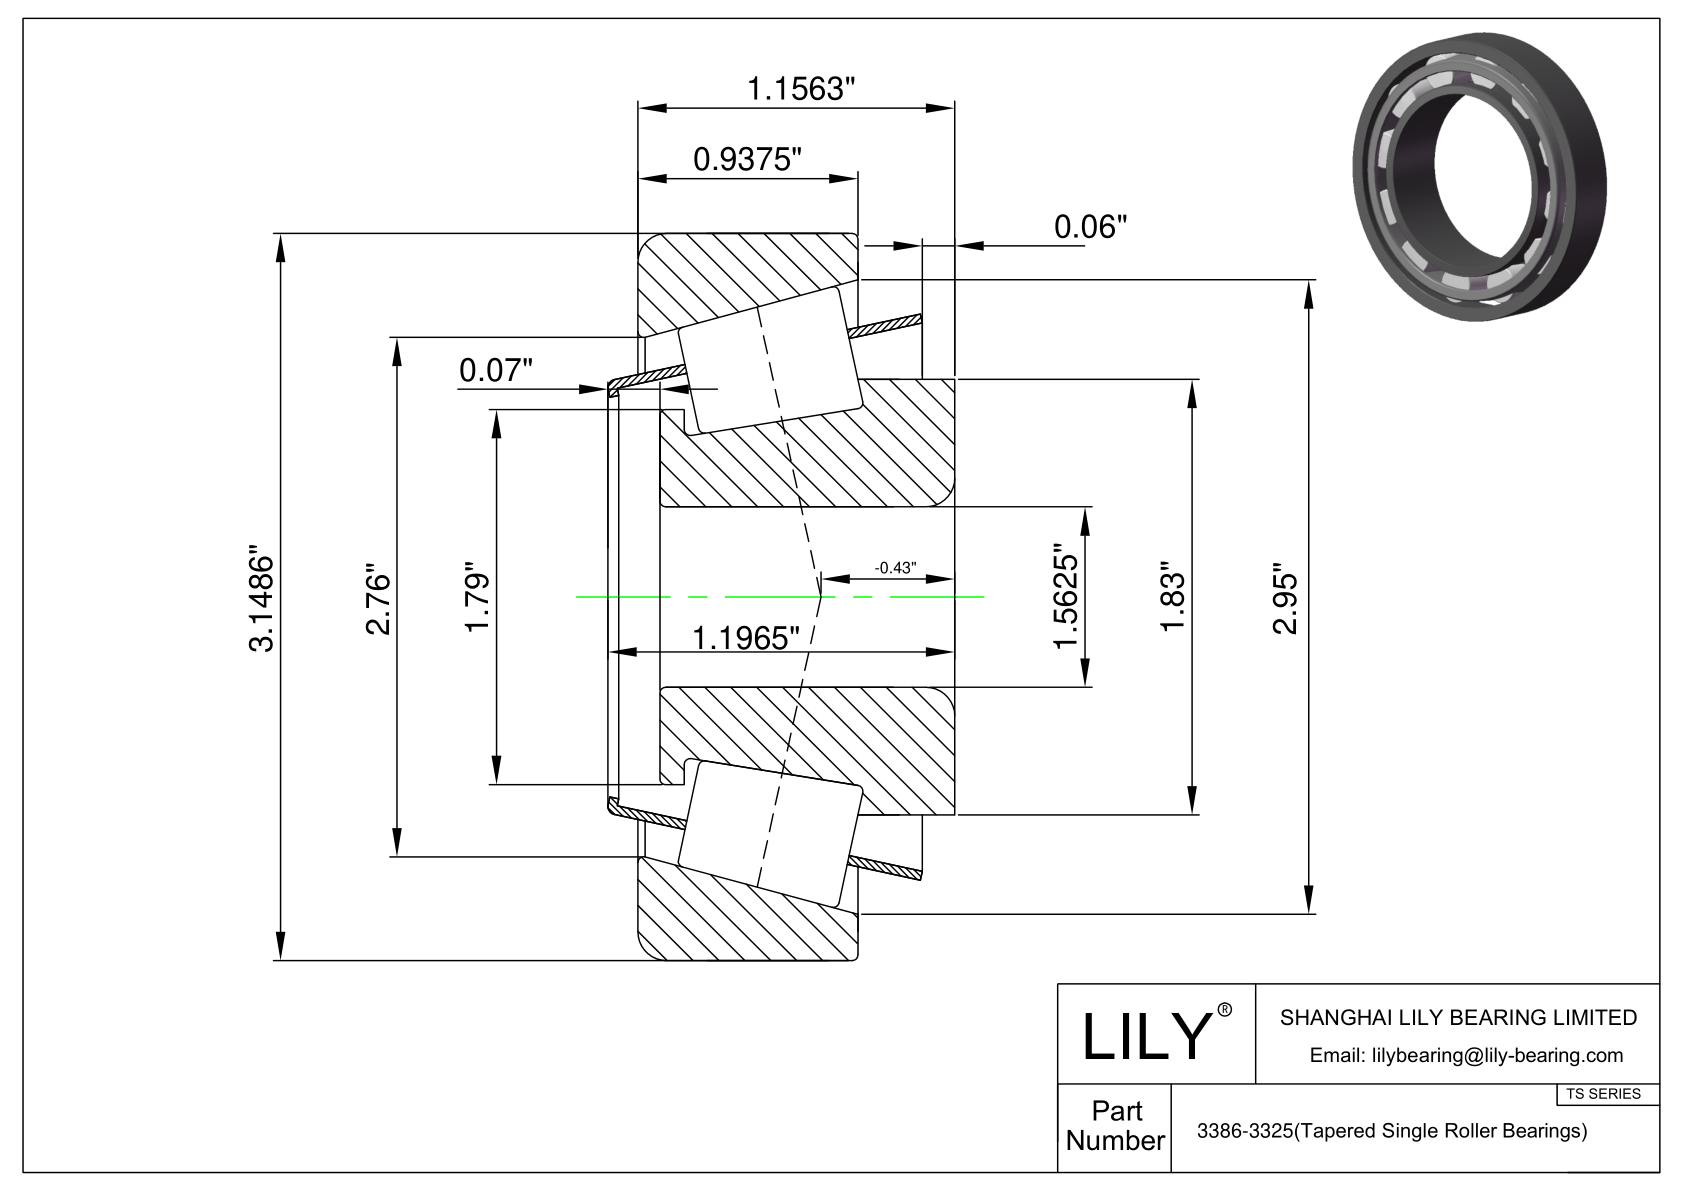 3386-3325 TS (Tapered Single Roller Bearings) (Imperial) cad drawing